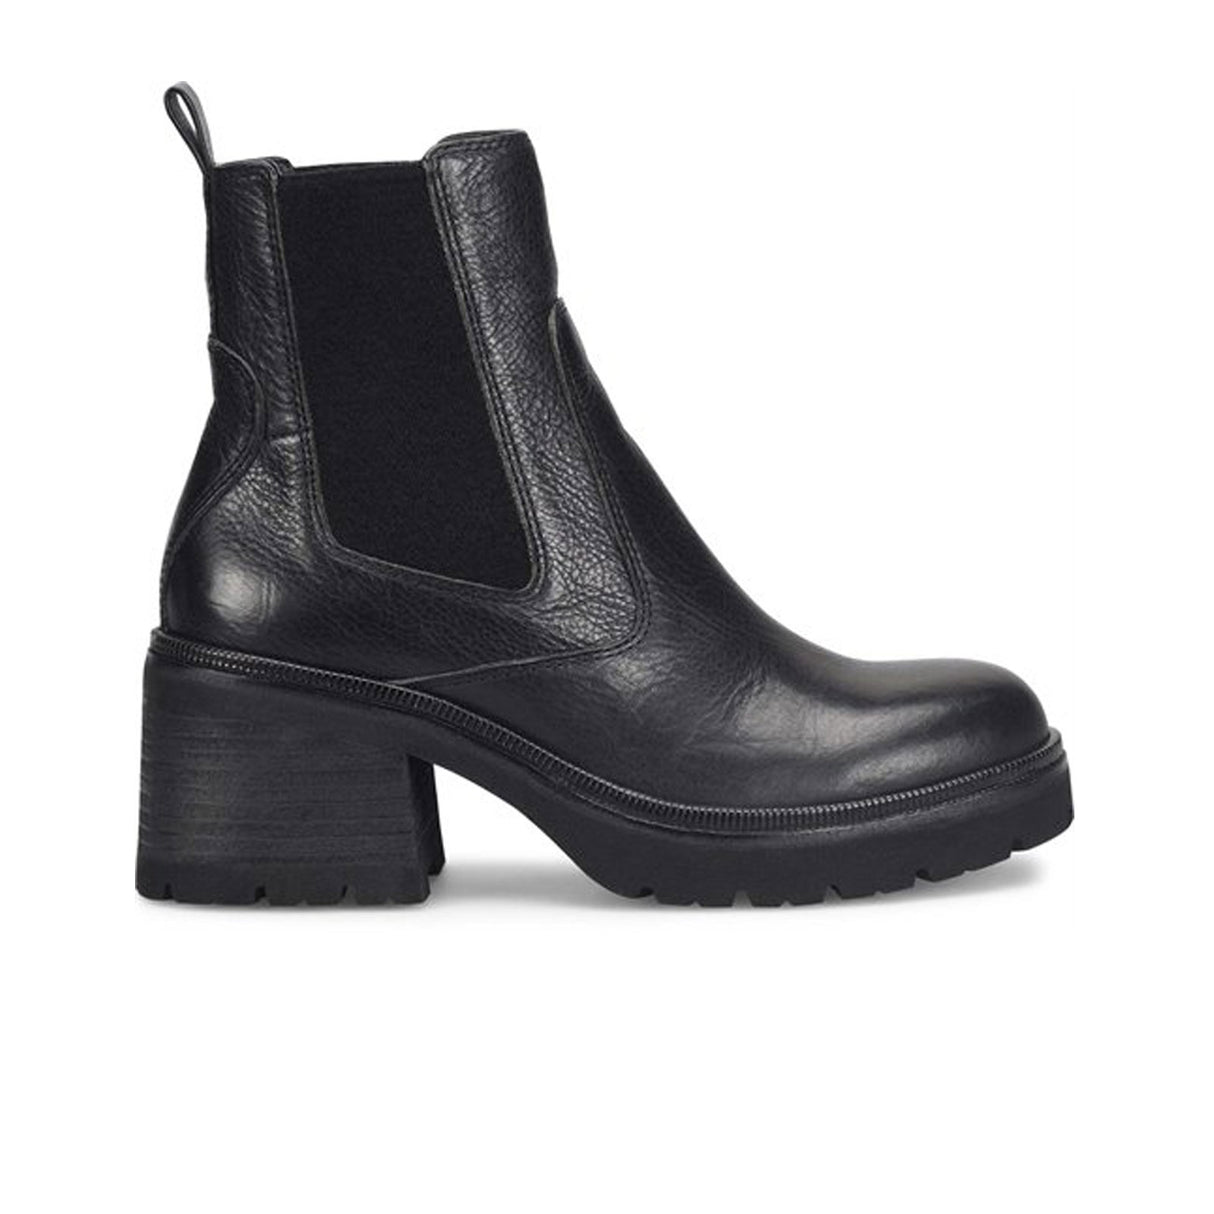 Sofft Jordie Chelsea Boot (Women) - Black Boots - Fashion - Chelsea Boot - The Heel Shoe Fitters